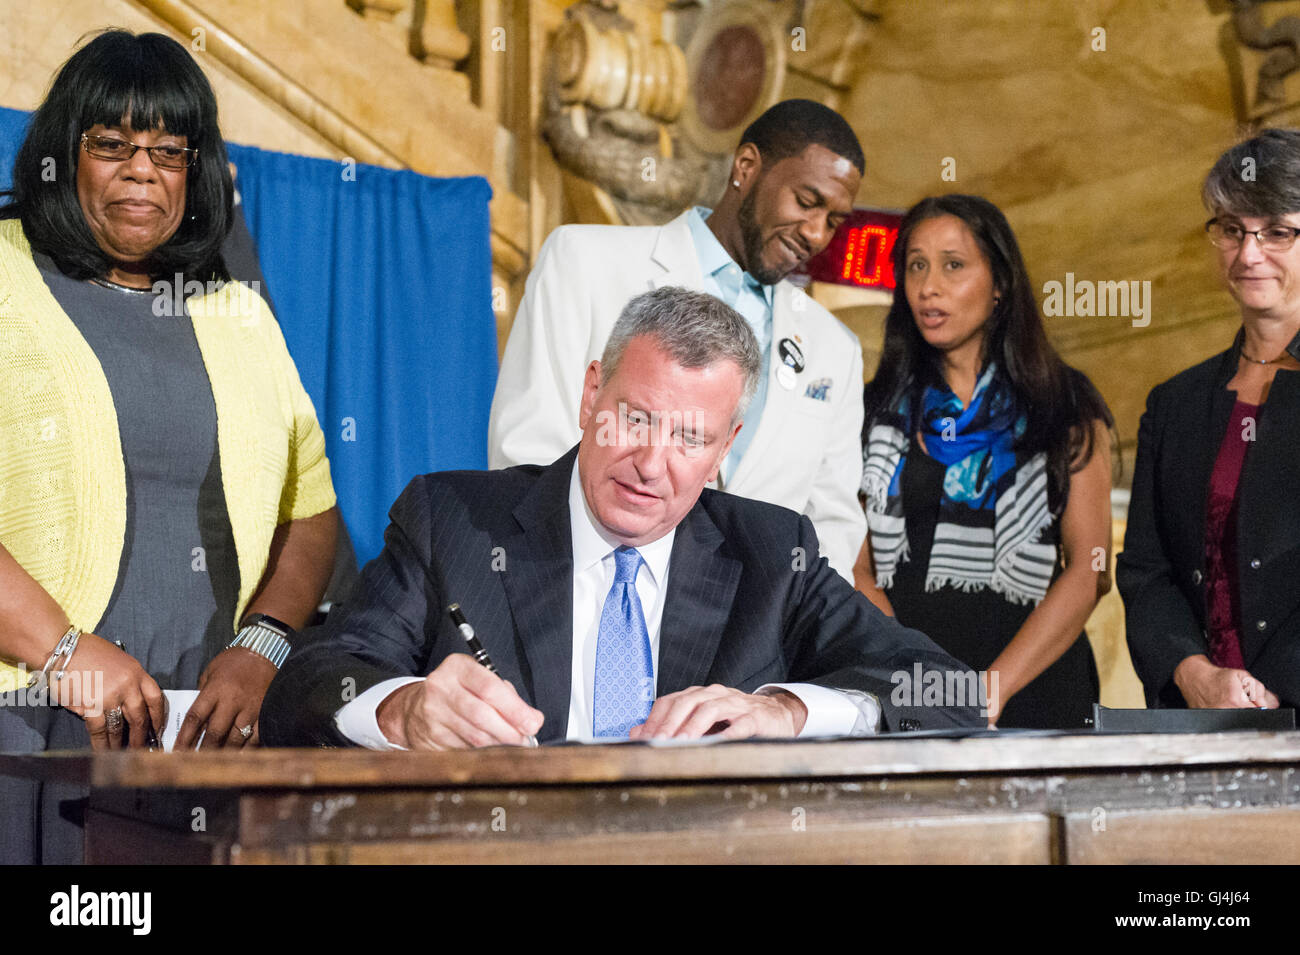 New York Mayor Bill de Blasio, at a bill signing related to NYPD reporting procedures on Wednesday, August 3, 2016 in New York. (© Frances M. Roberts) Stock Photo